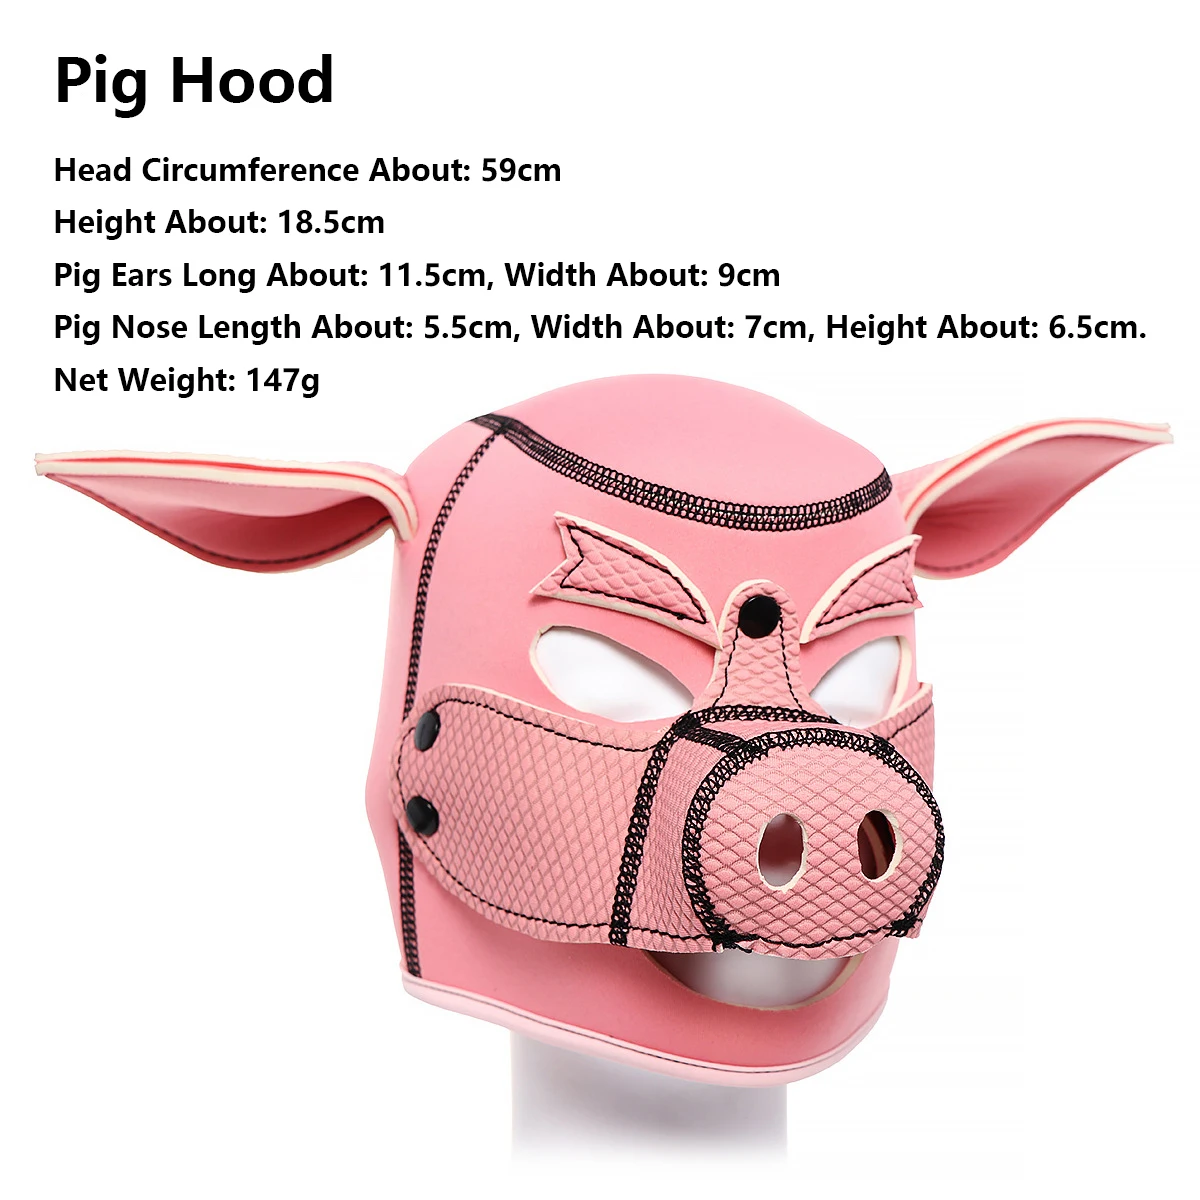 

2021 New Piggy Play Pink Pig Hood Mask Slave Full Head With Ears Bondage Neoprene Headgear Party Sex Mask Pet Role Play Sex Toys